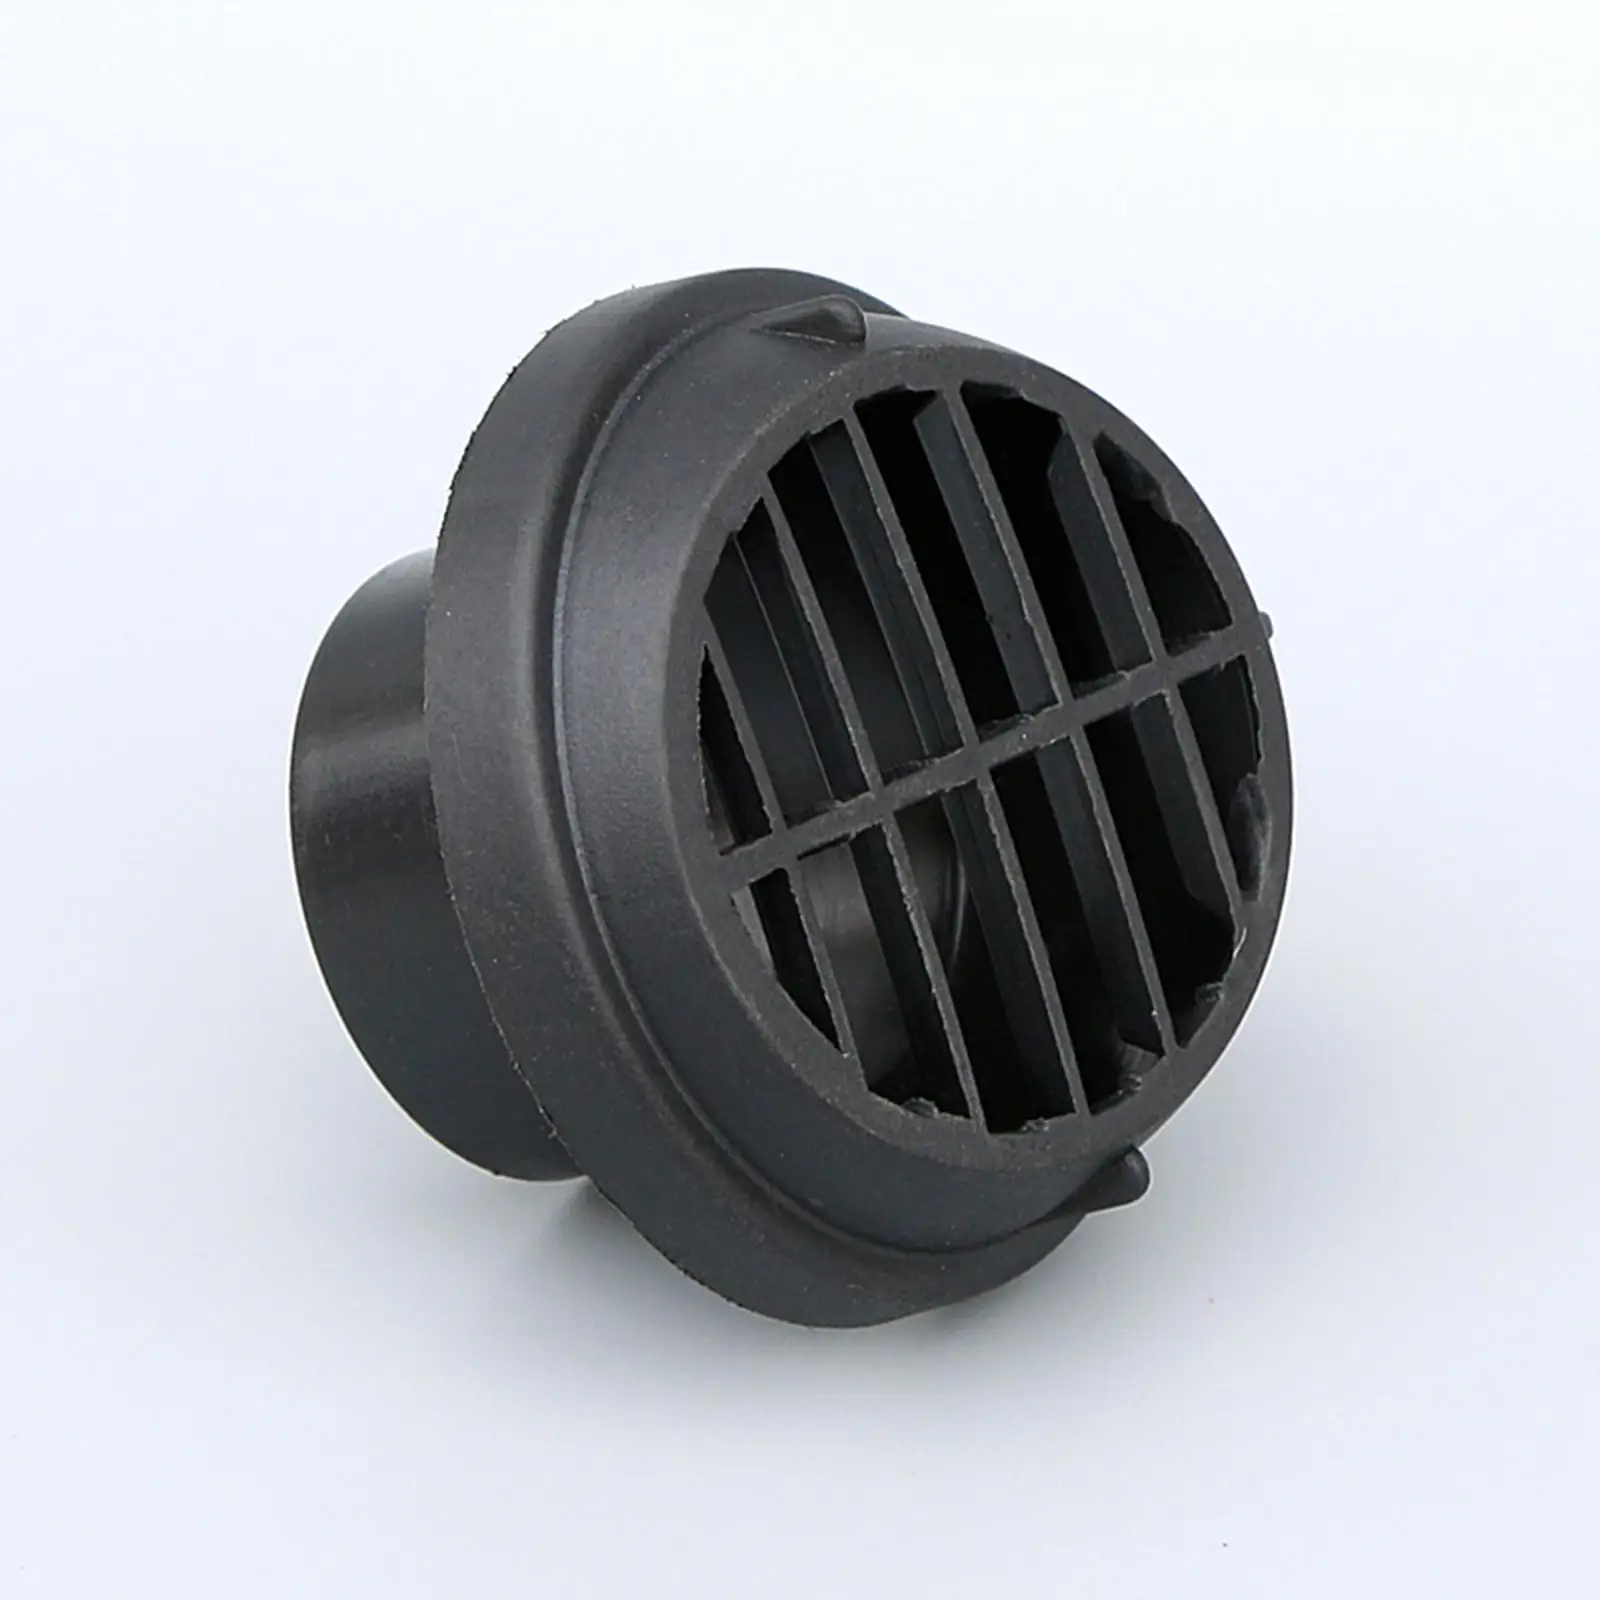 Warm Heater Air Vent Outlet Easy Installation Durable Black Parking Heater Air Vent for Automotive Car Replacement Assembly